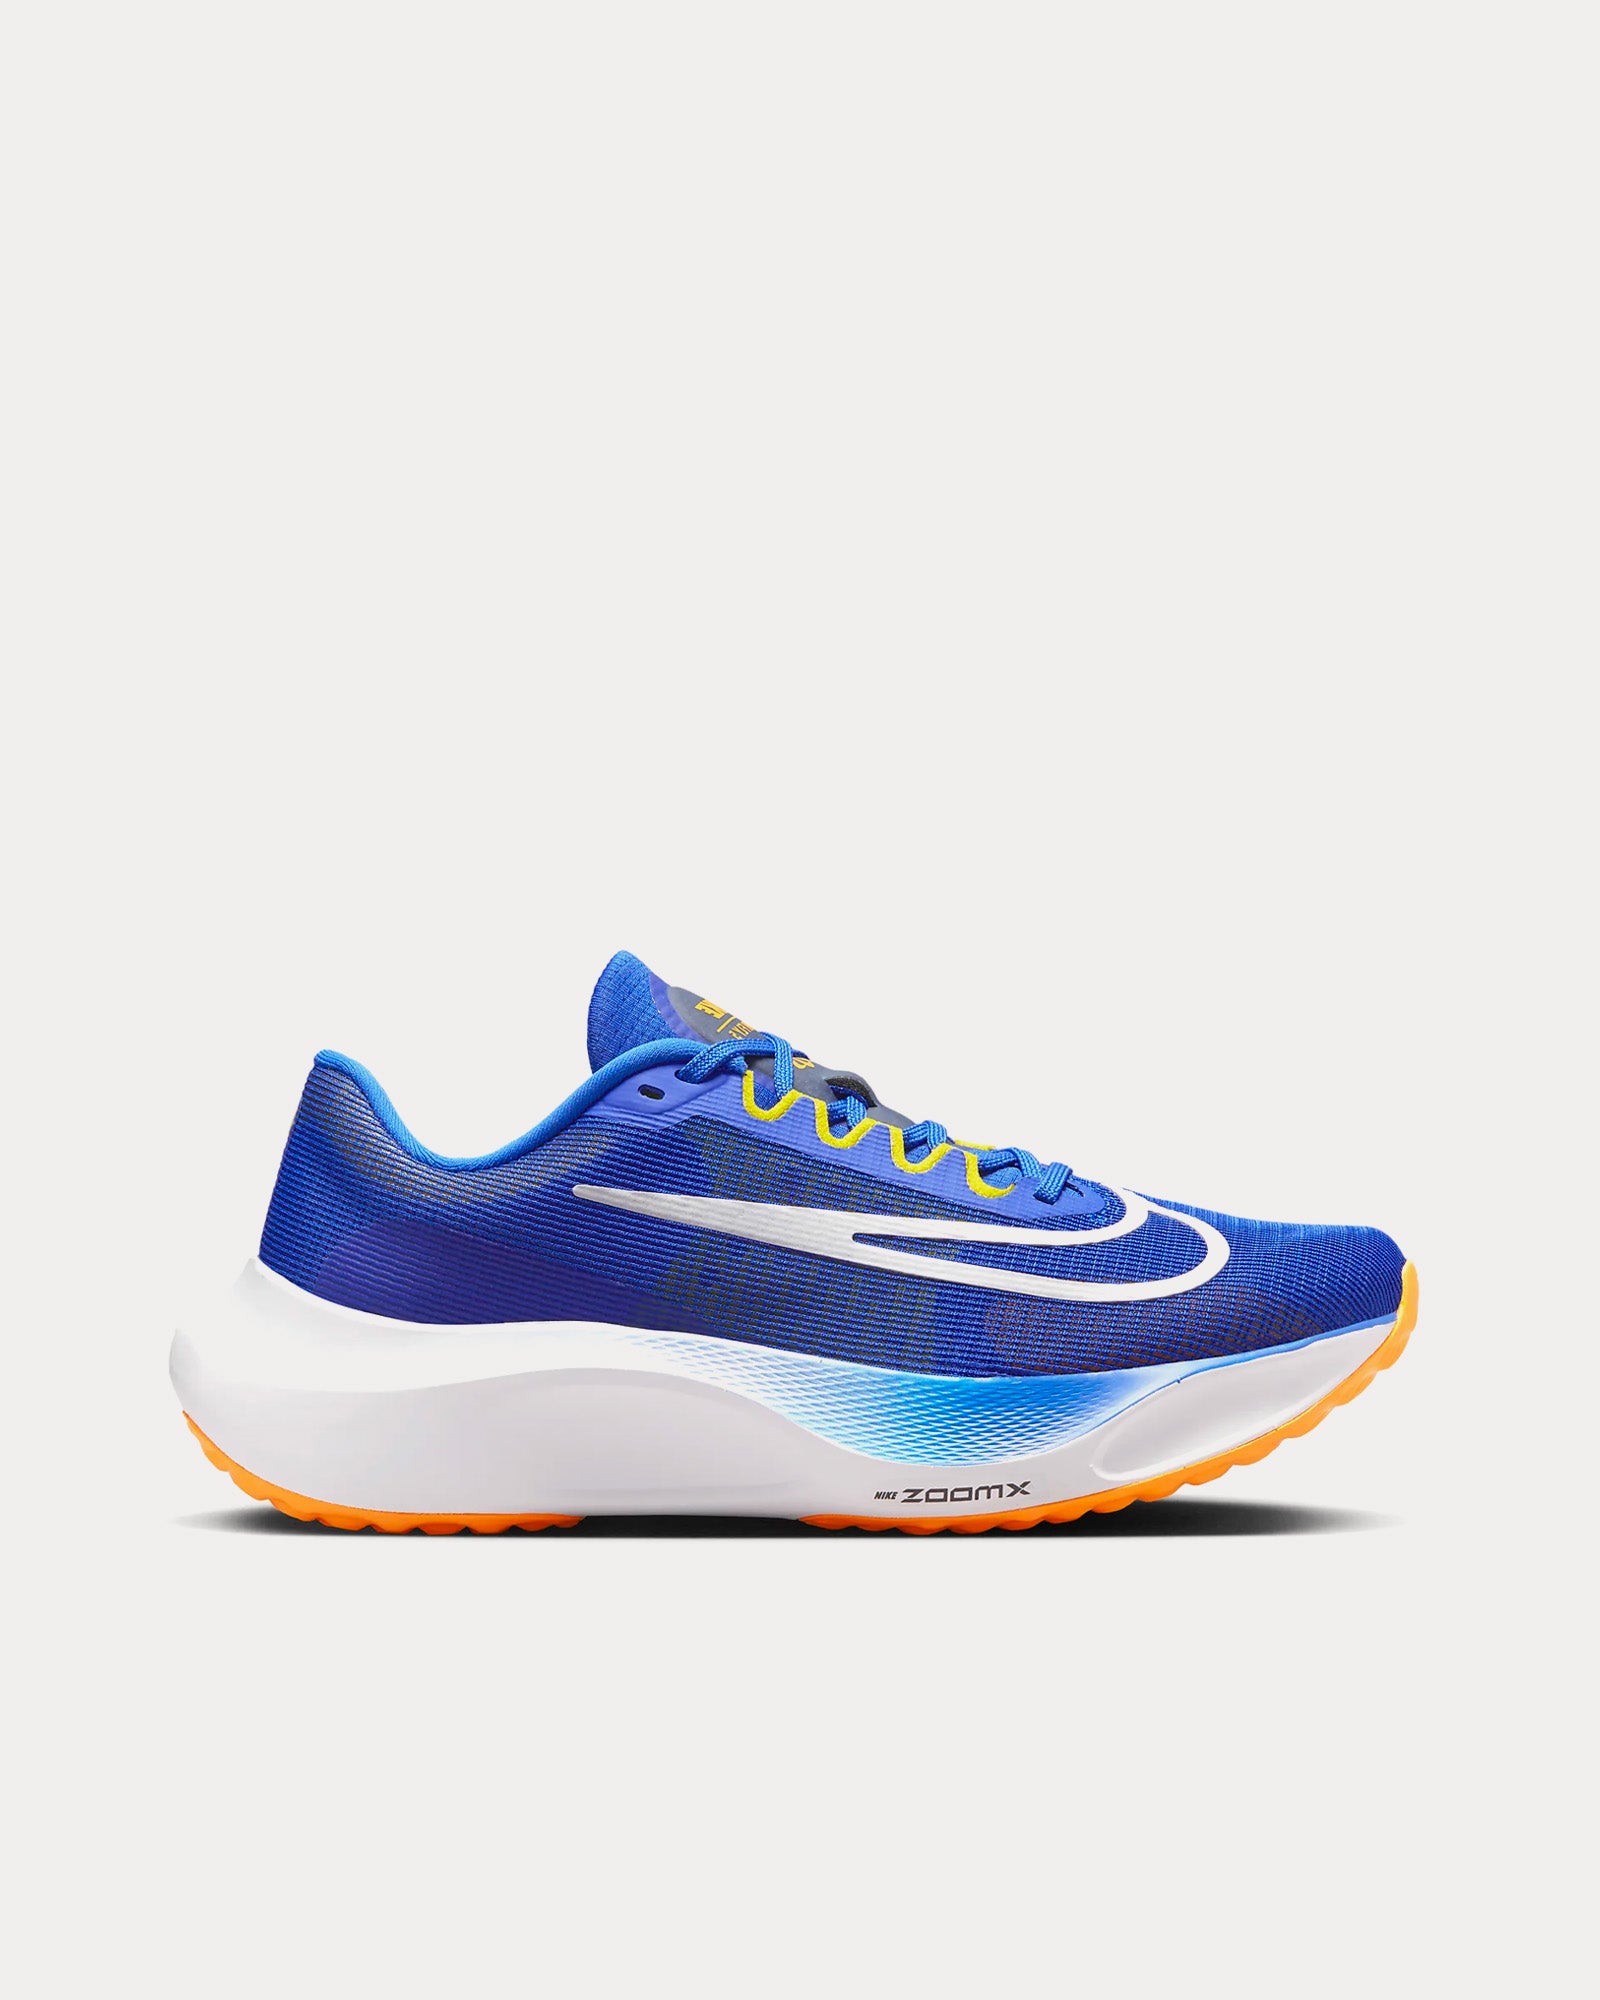 Zoom Fly 5 Racer Blue / High Voltage / Sundial / White Running Shoes